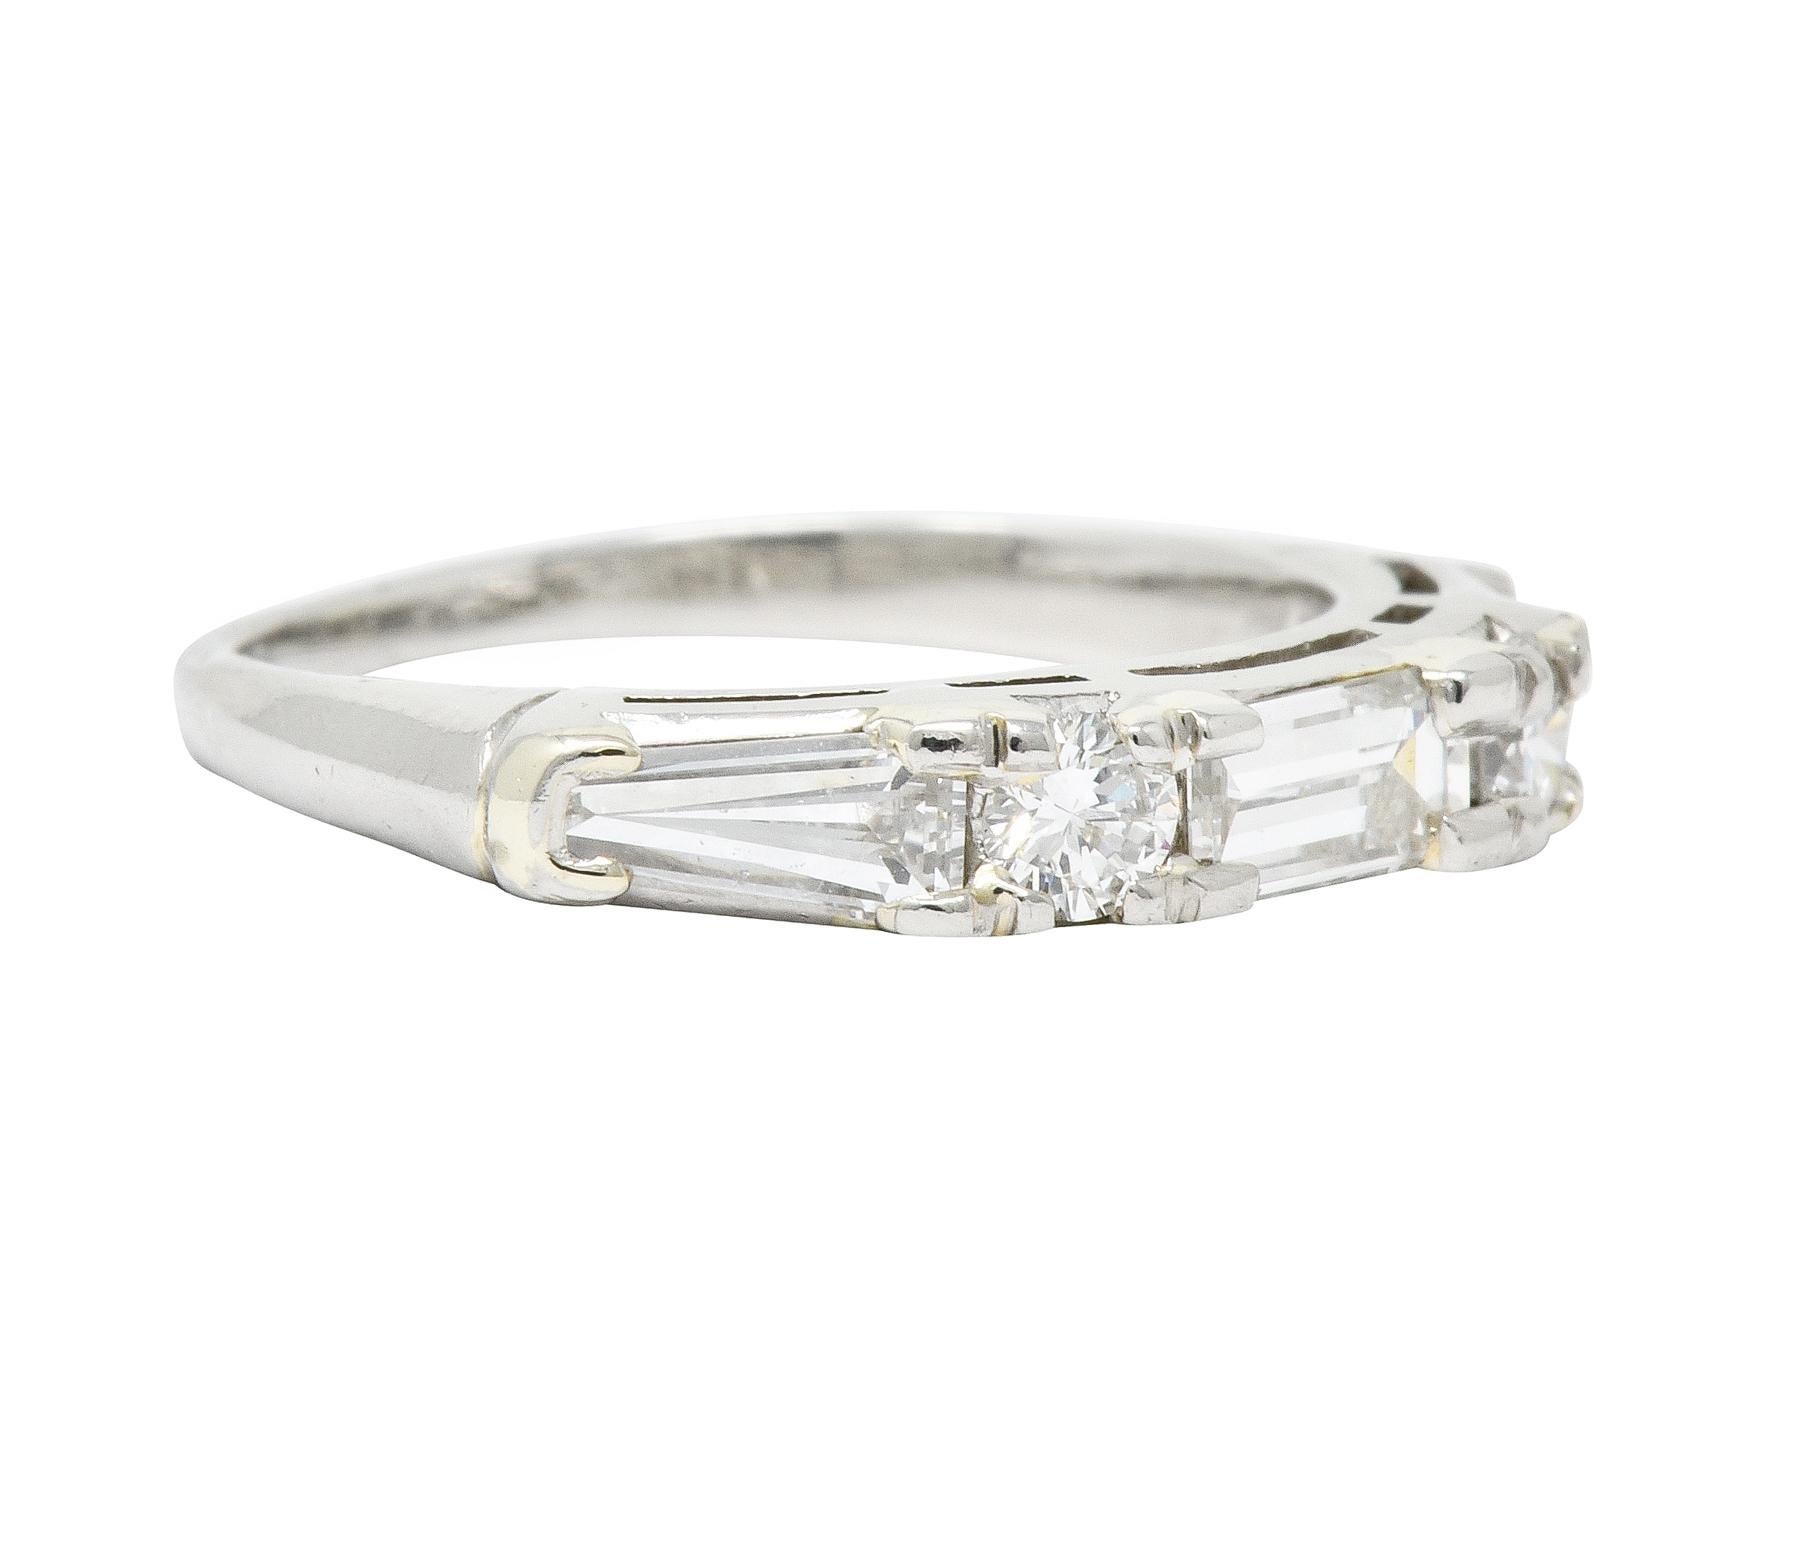 Band style ring set to front with diamonds weighing in total approximately 0.80 carat, G/H color with VS clarity

Centering a baguette cut diamond, flanked by two round brilliant cut diamonds, and completed by two outer tapered baguette cut